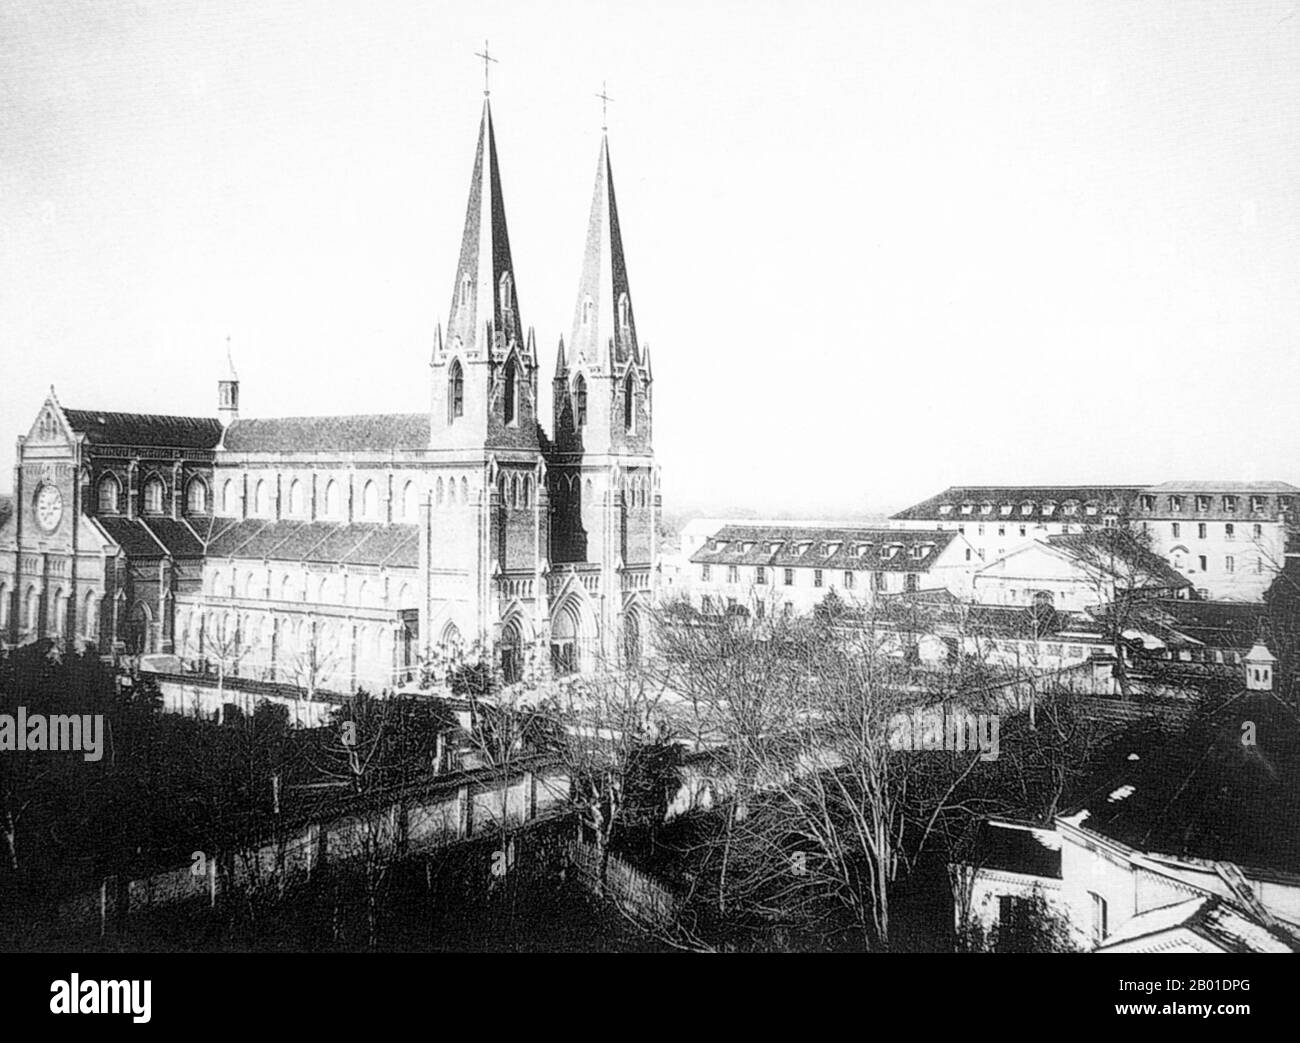 China: Shanghai's Xujiahui Cathedral (St Ignatius Cathedral) was built between 1906 and 1910.  Designed by English architect William Doyle, and built by French Jesuits between 1905 and 1910, it is said to have once been known as 'the grandest cathedral in the Far East.' It can accommodate 2,500 worshippers at the same time. In 1966, at the opening of the Cultural Revolution, Red Guards vandalised the cathedral, tearing down its spires and ceiling, and smashing its roughly 300 square metres of stained glass. For the next ten years the building served as a state-owned grain warehouse. Stock Photo